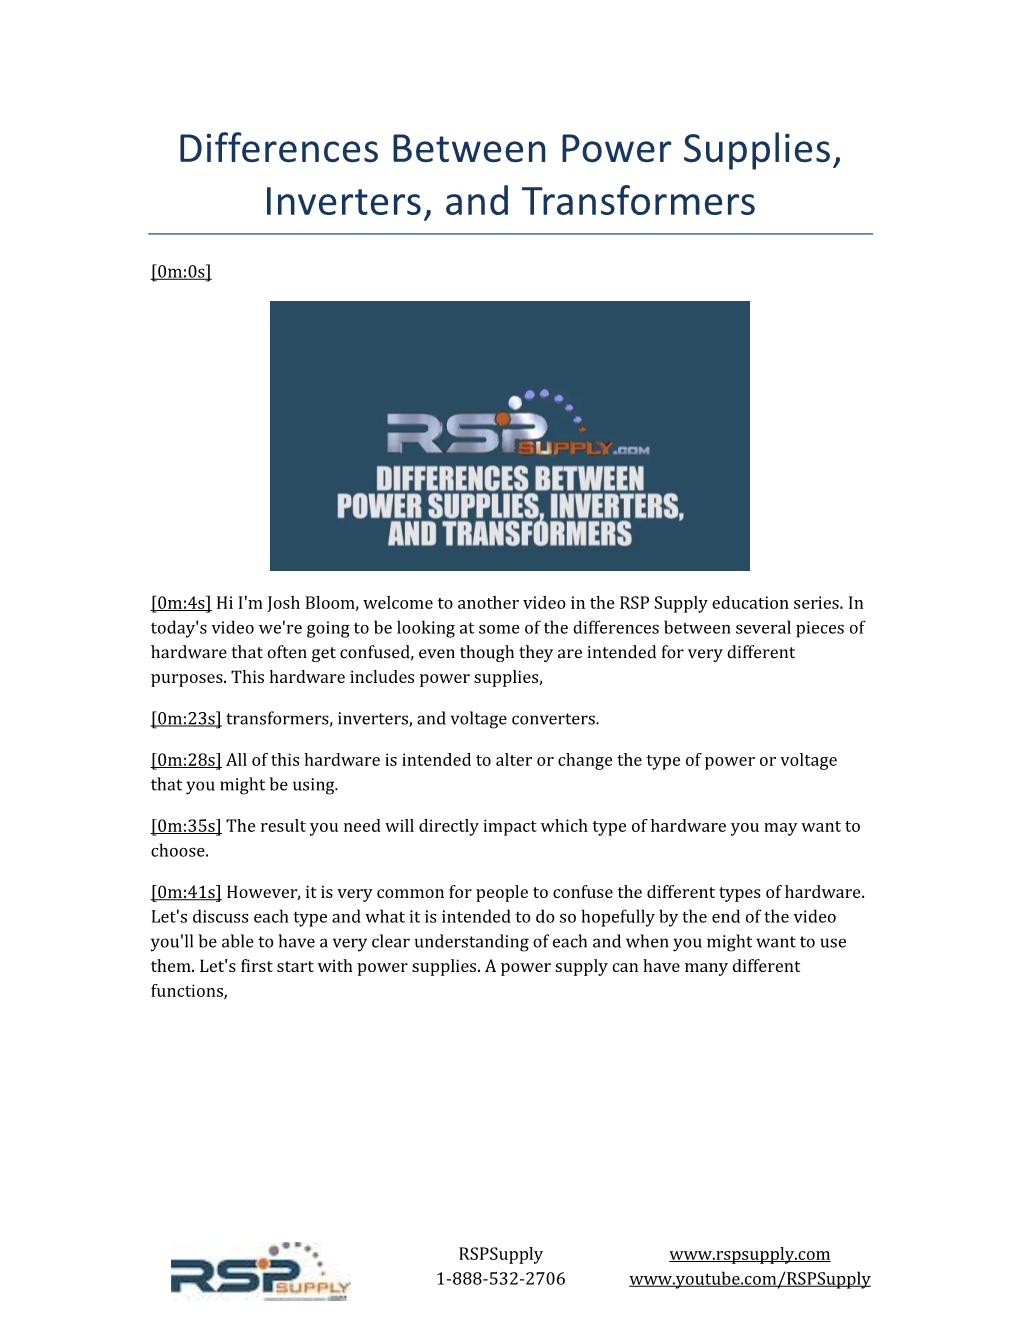 Differences Between Power Supplies, Inverters, and Transformers